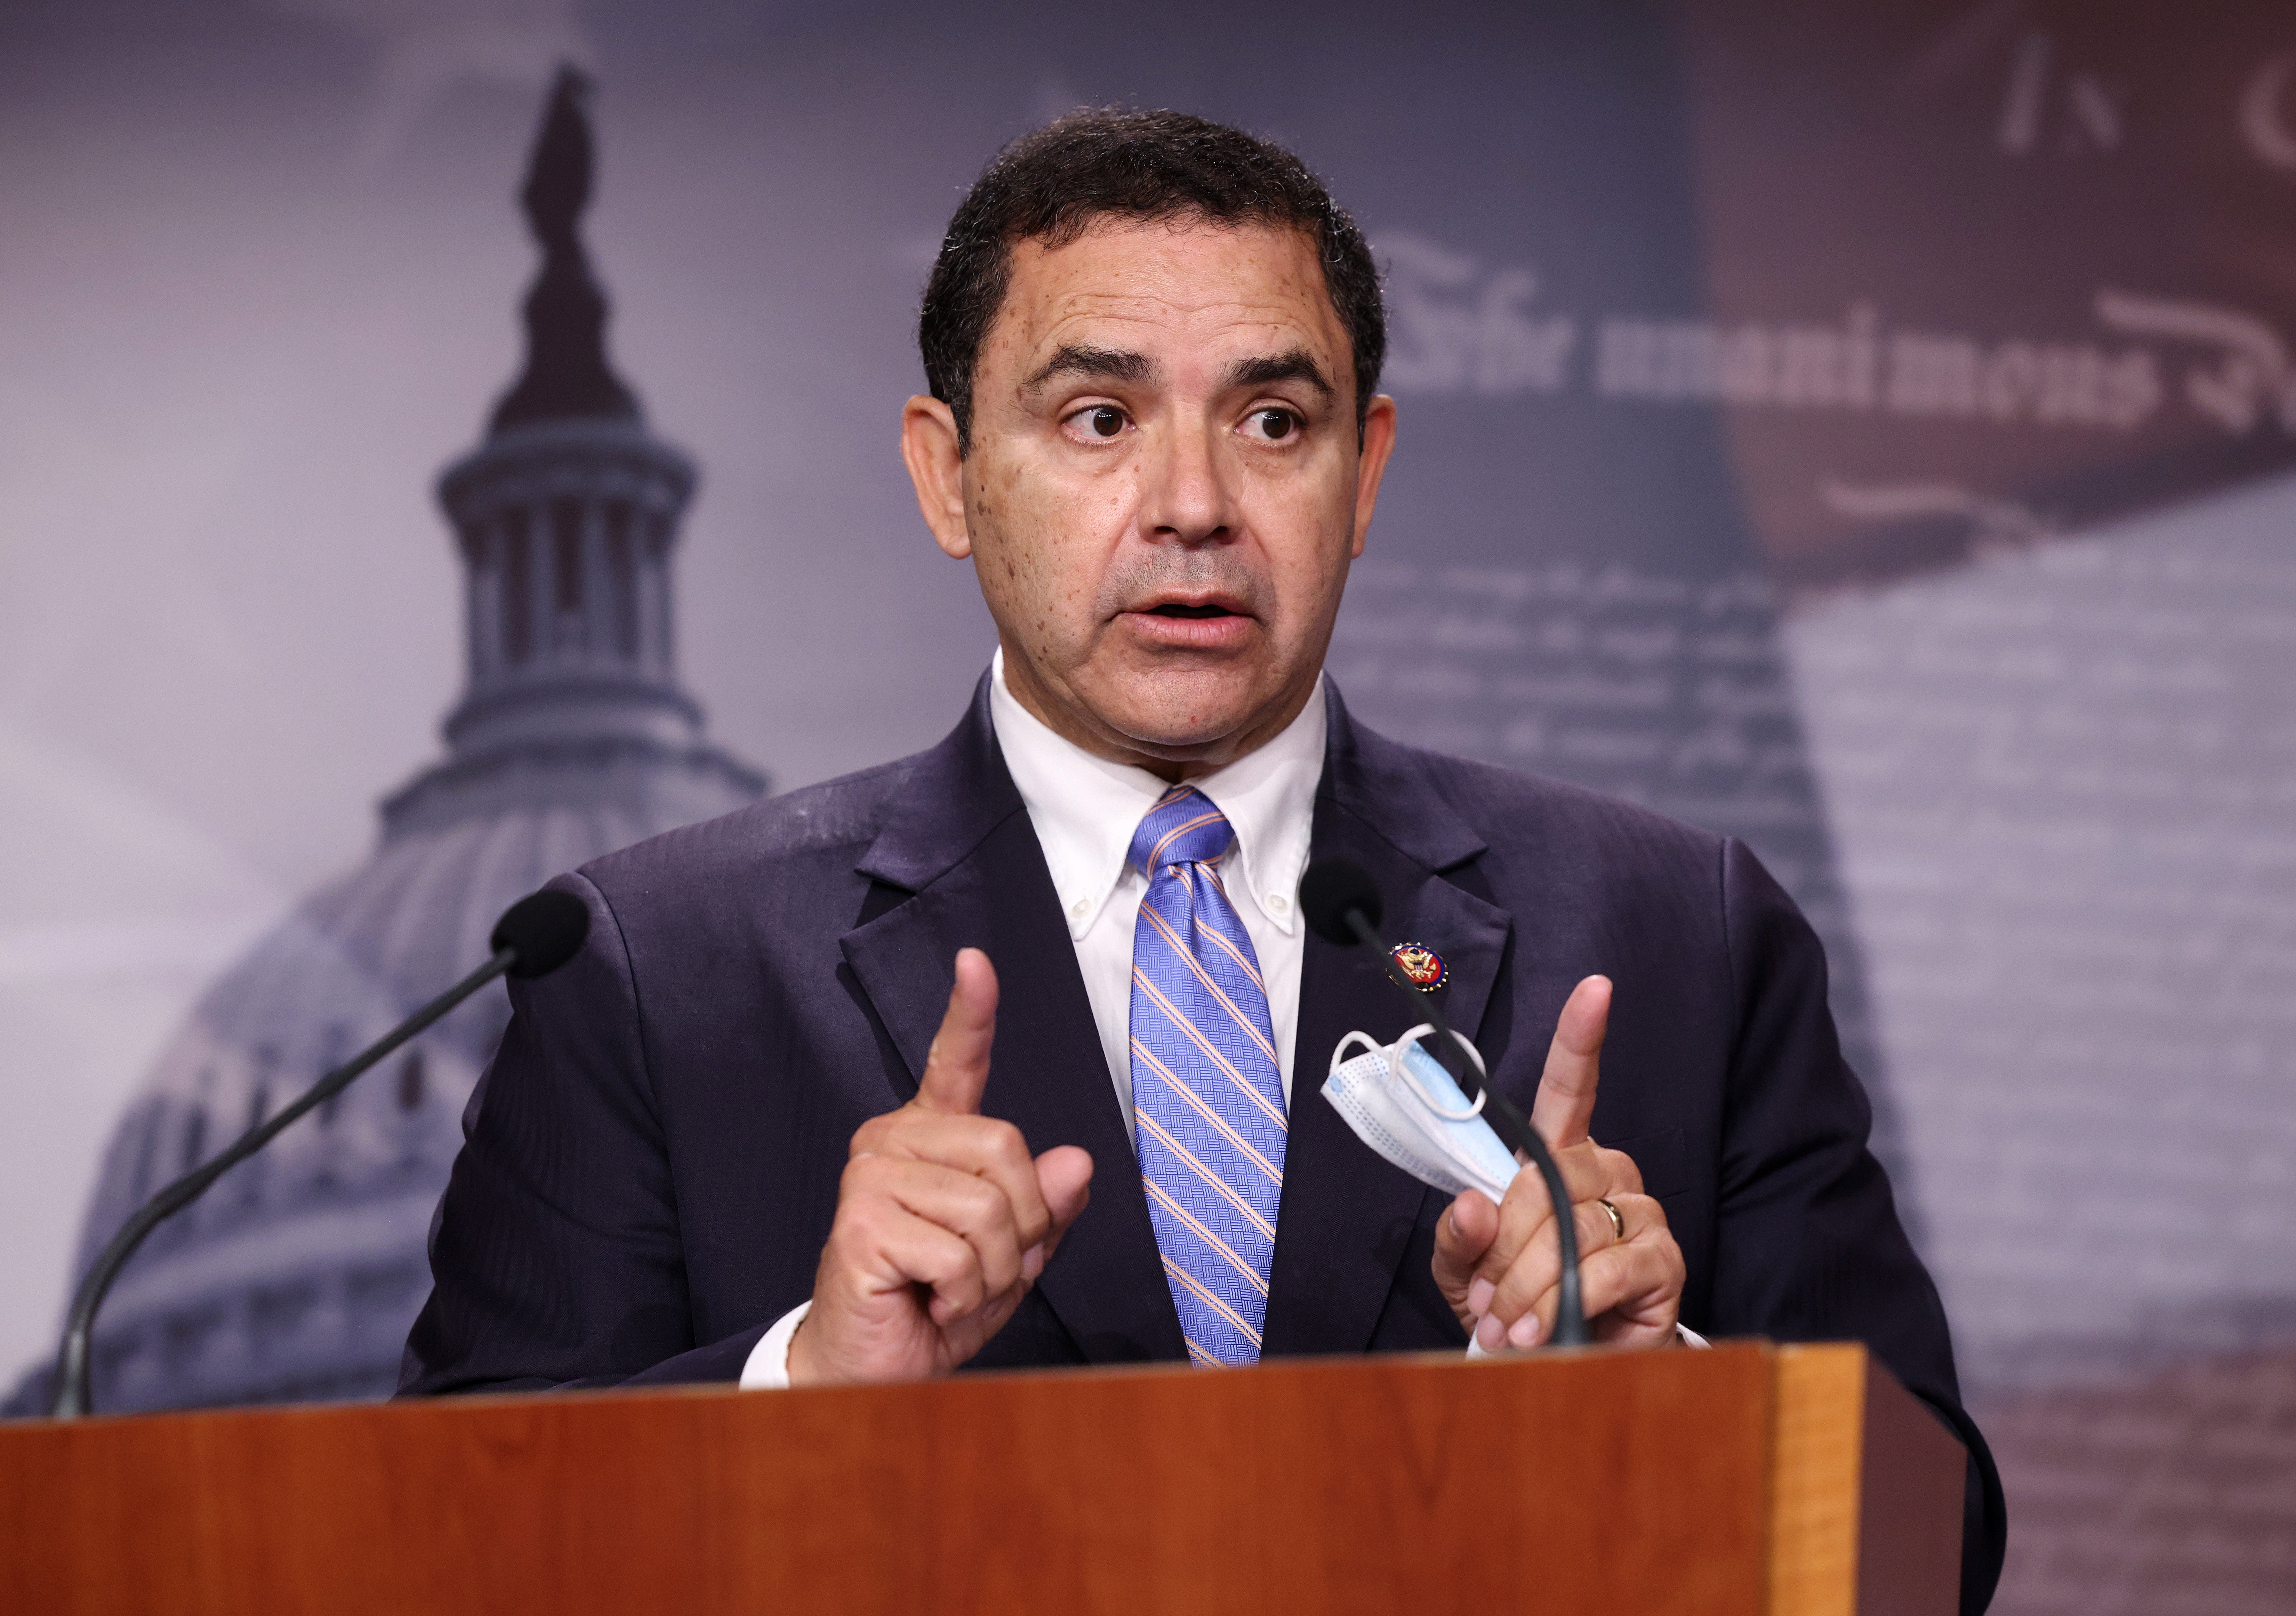 Texas Democrat Henry Cuellar has said he and his wife are ‘innocent’ as he faces a potential indictment by federal prosecutors on unspecified charges